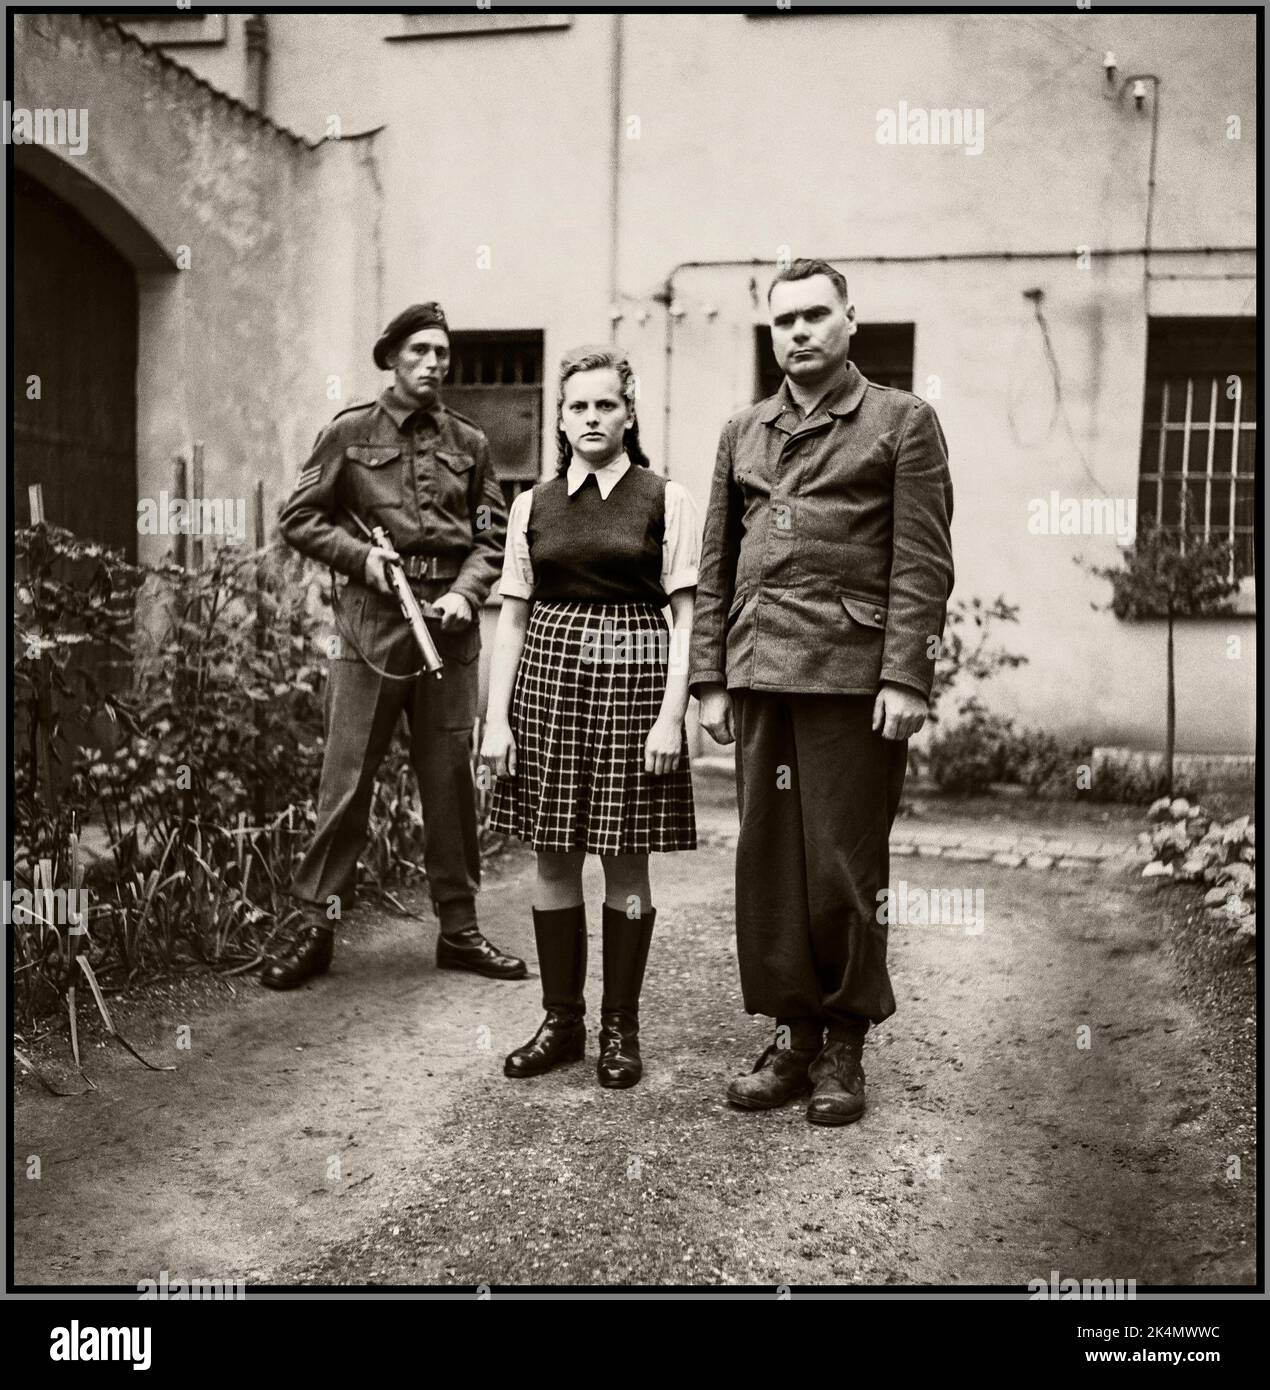 IRMA GRESE NAZI CONCENTRATION CAMP GUARD (left) Irma Ilse Ida Grese (7 October 1923 – 13 December 1945) was a Nazi concentration camp guard at Ravensbrück and Auschwitz, and served as warden of the women's section of Bergen-Belsen. Together with Joseph Kramer BEAST OF BELSEN Hauptsturmführer and the Commandant of Auschwitz-Birkenau and of the Bergen-Belsen concentration camps.  Being guarded in custody by a British soldier. Two  sadistic heartless Nazi concentration camp officials who were executed for their war crimes against humanity. Stock Photo